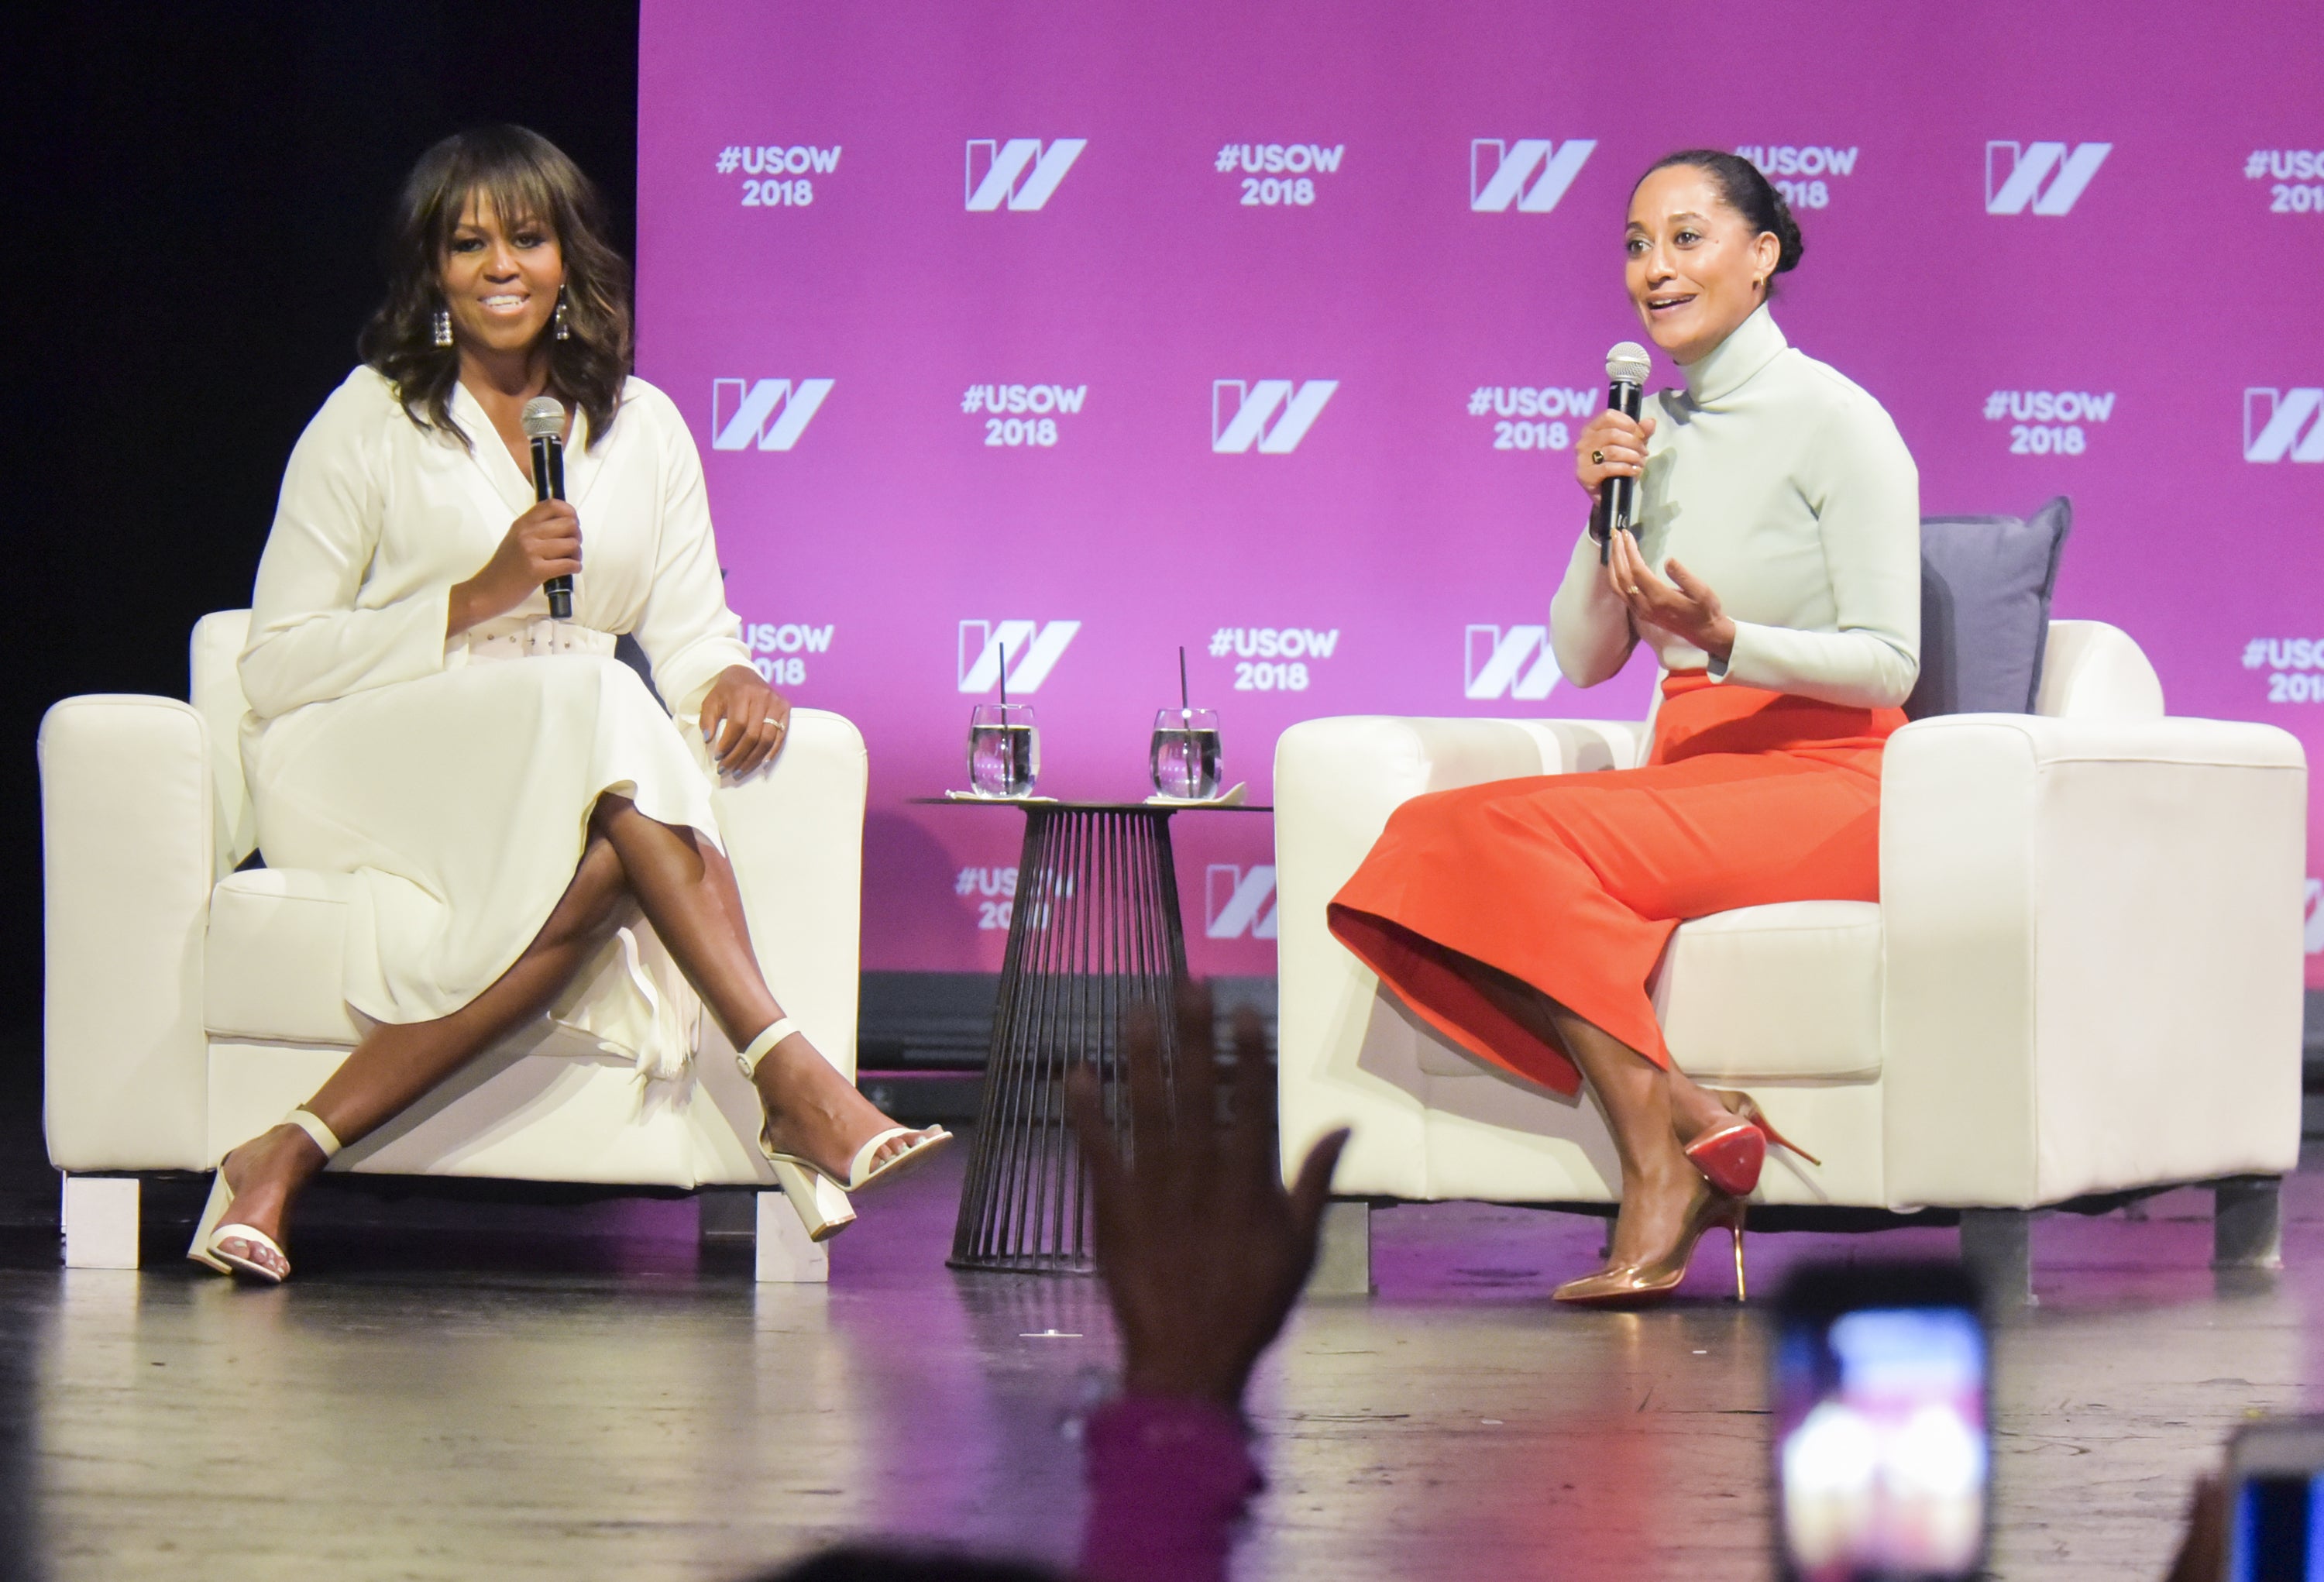 Michelle Obama Says She Does Not Want To Run For President—Again
